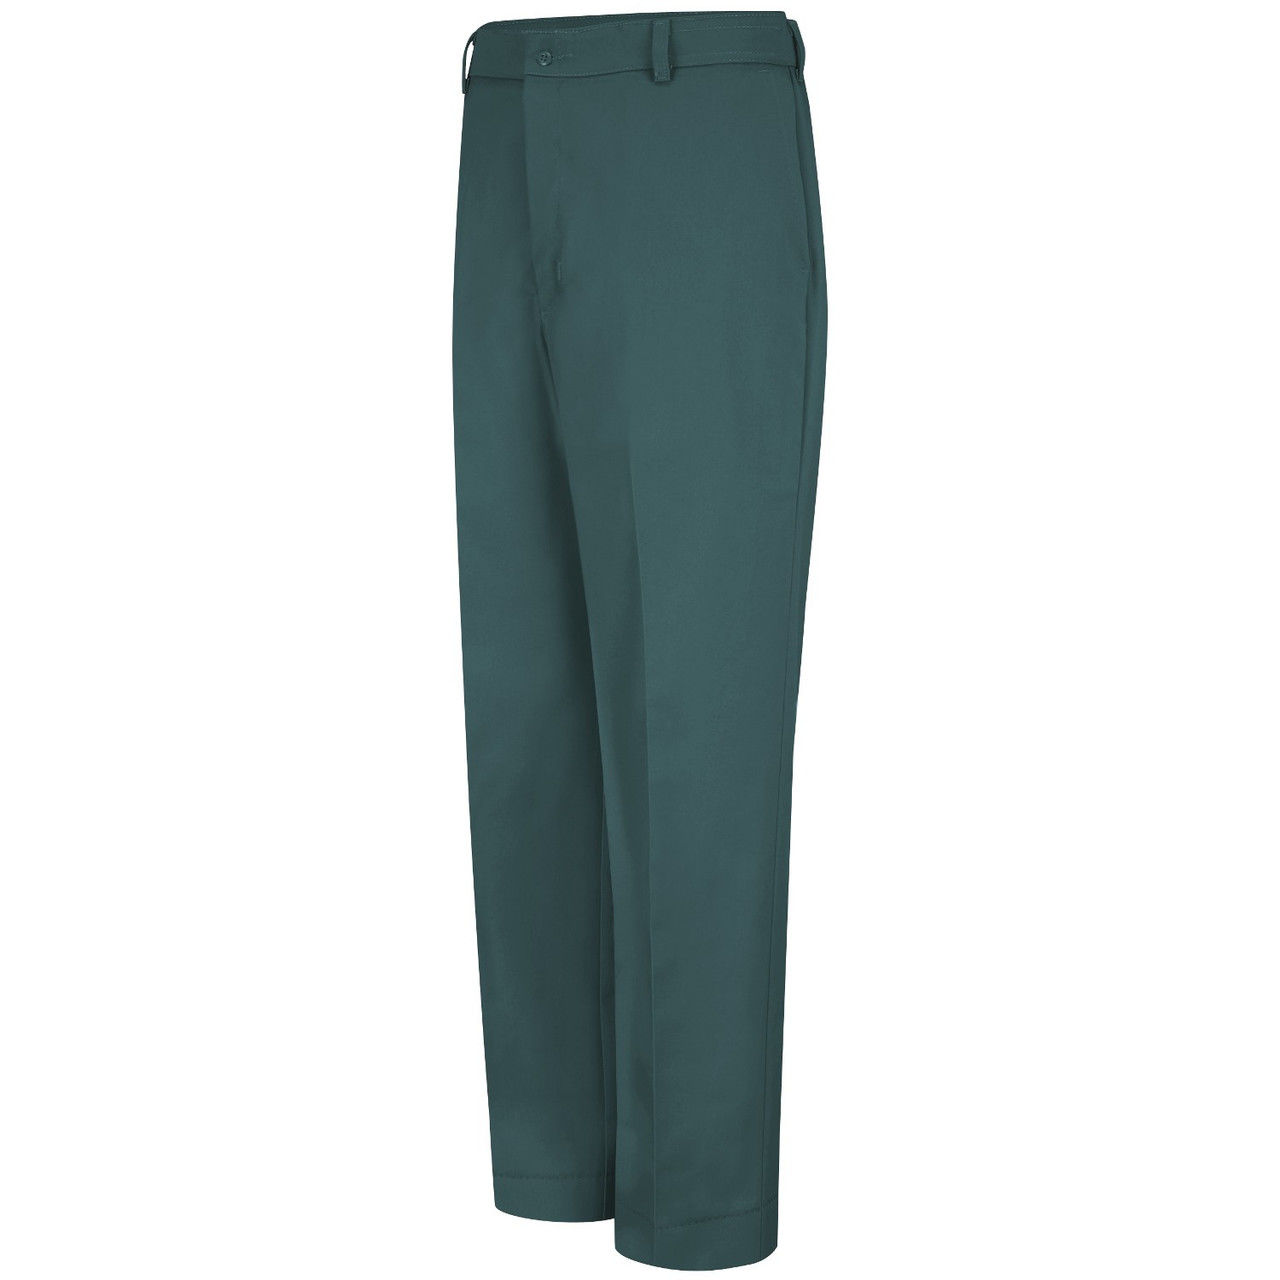 What is the recommended care for the Dura-Kap Brown Industrial Pants PT20BN?